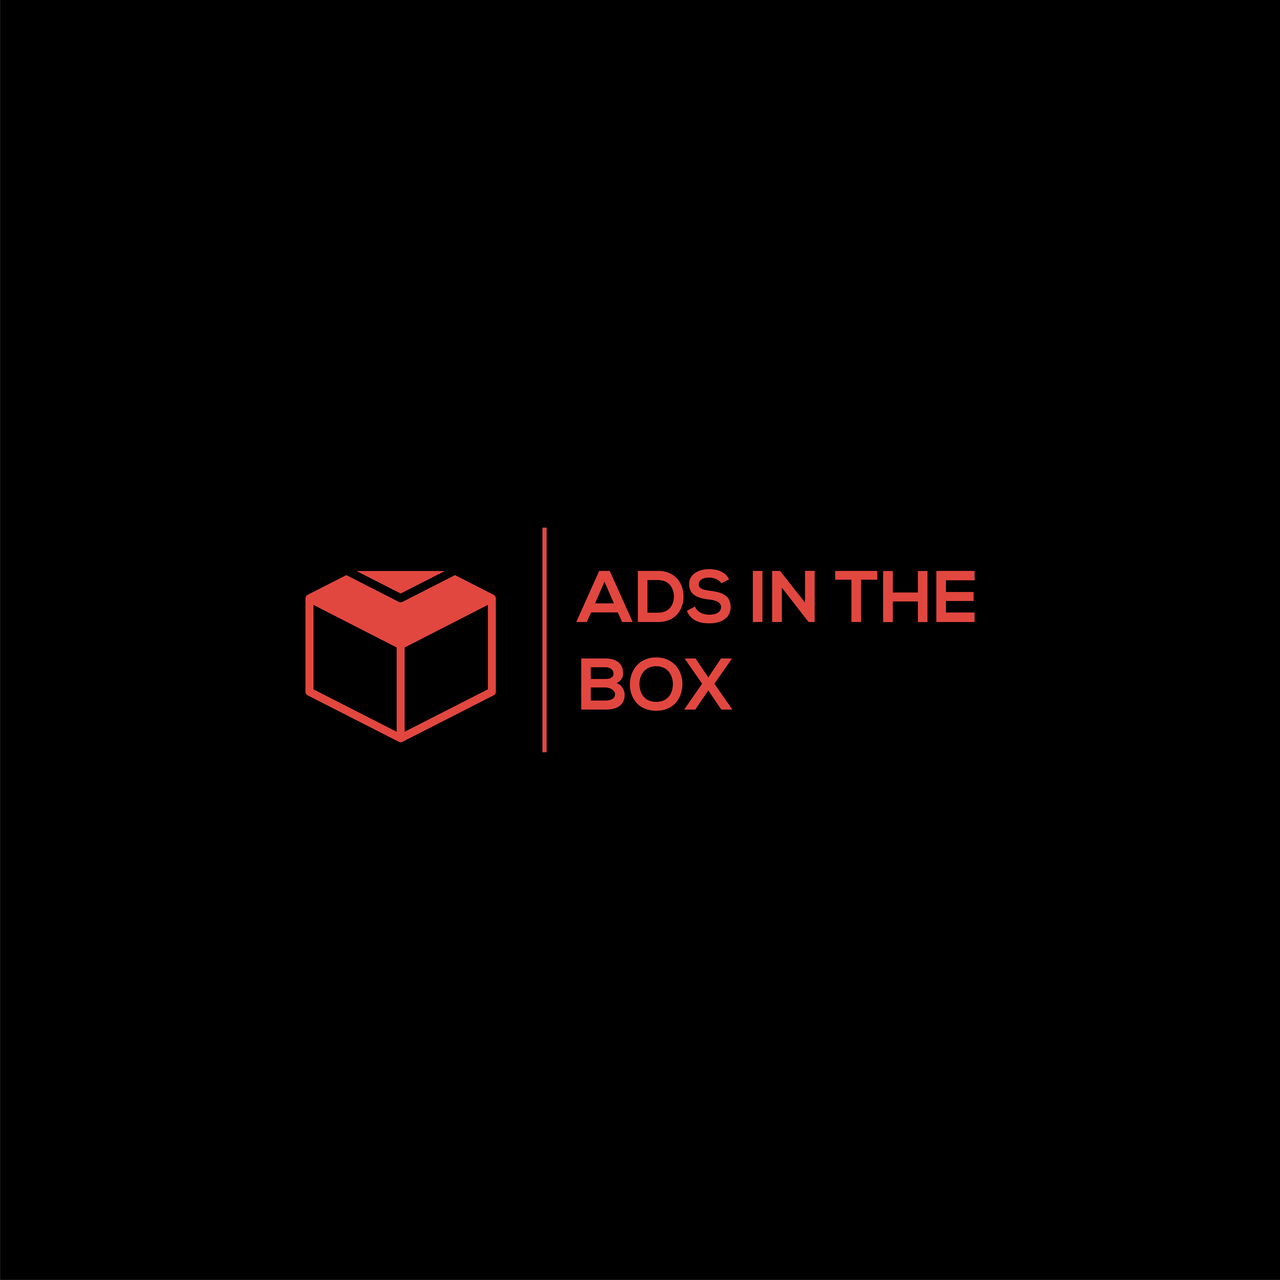 Ads in The Box